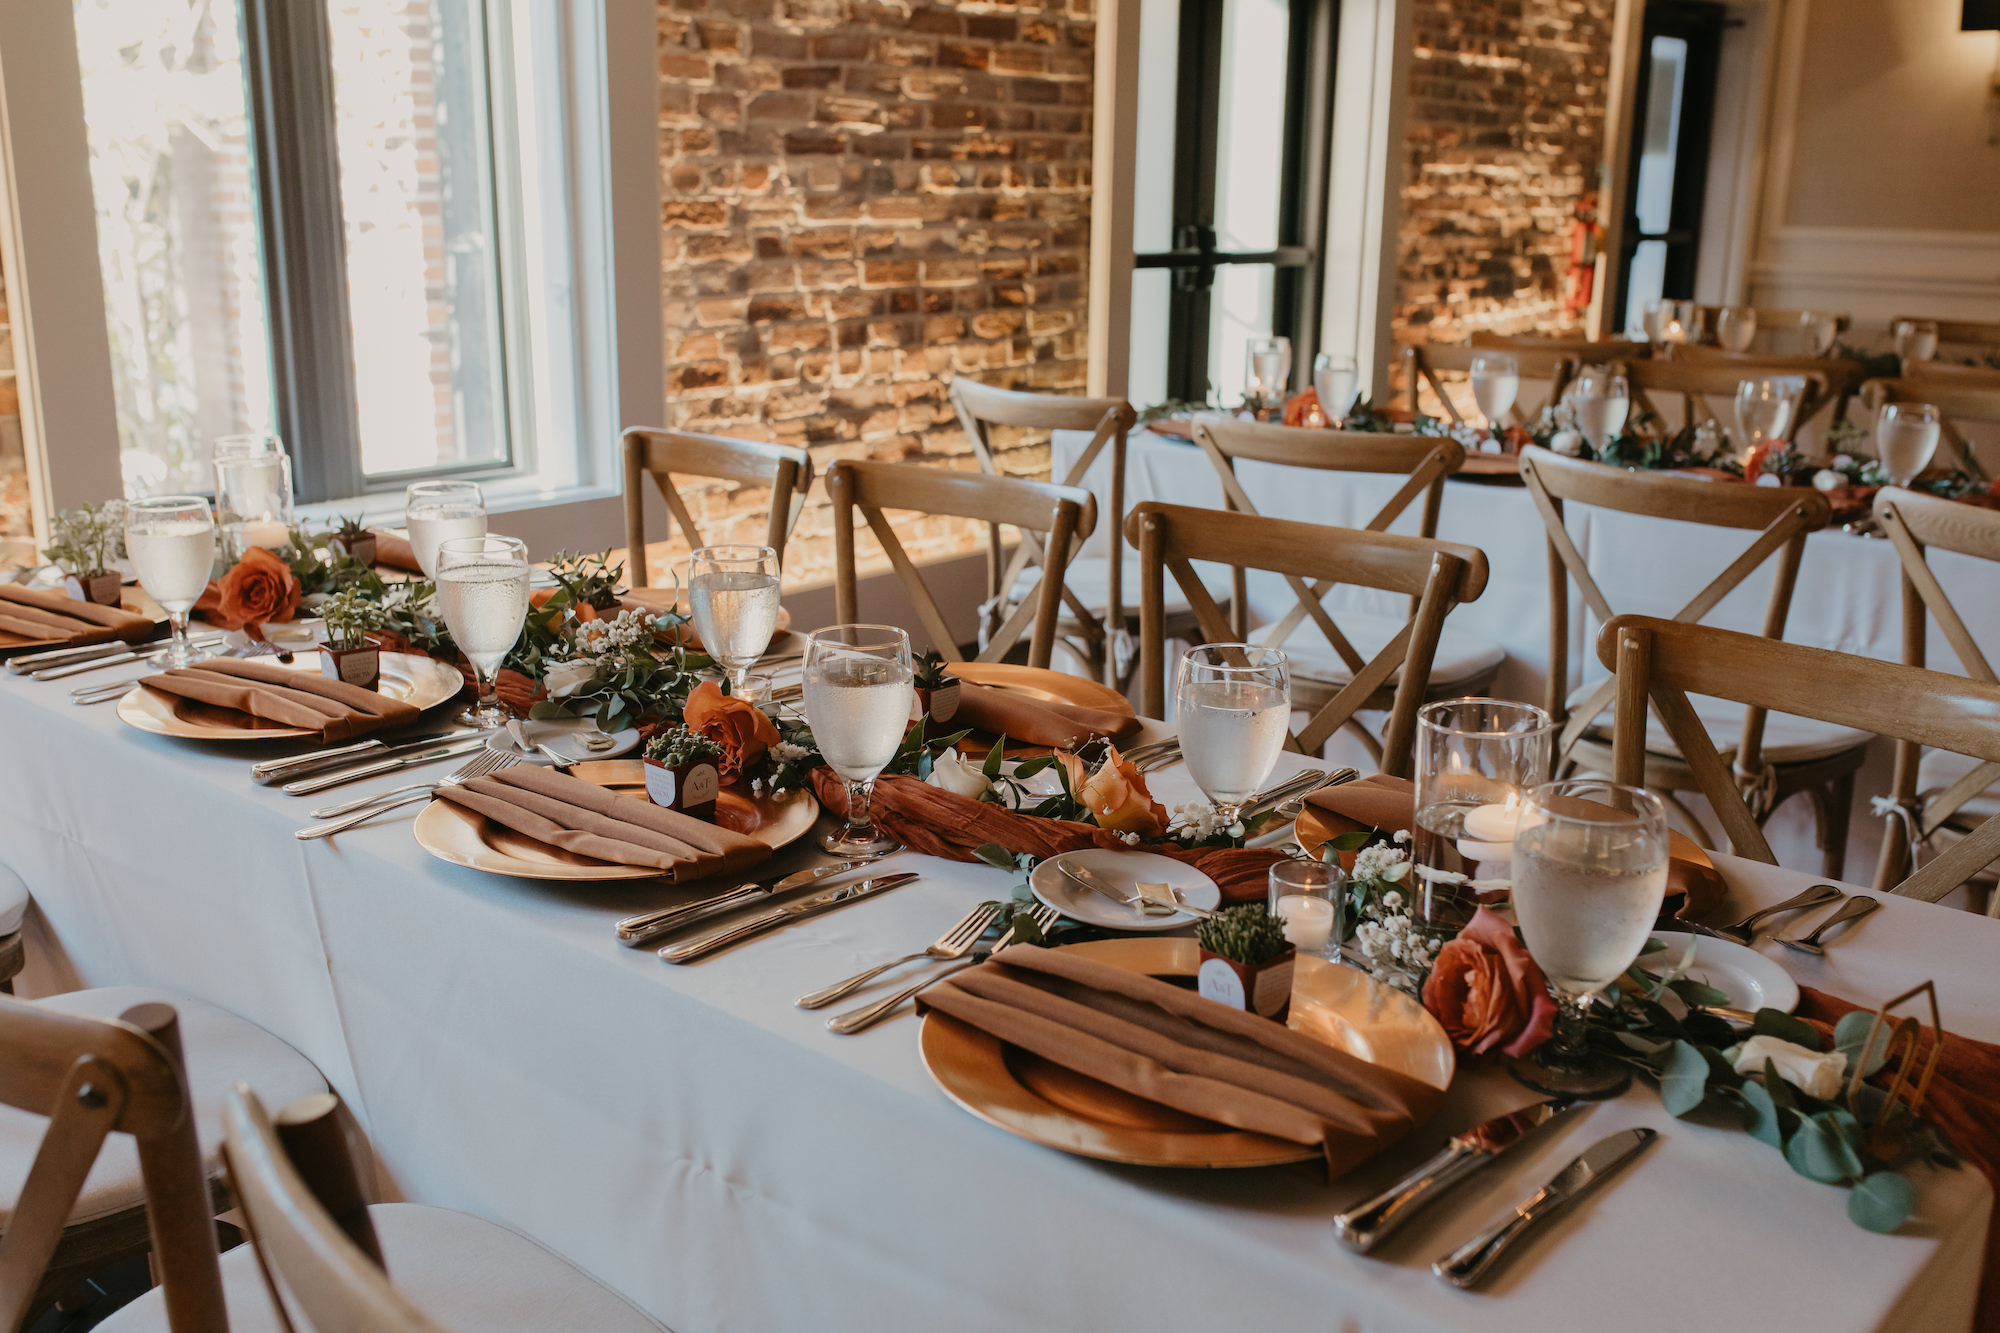 Wedding Guest Succulent Gift Ideas | Boho Reception Table Setting Inspiration | Eucalyptus Garland with Terracotta Roses and Baby's Breath Centerpiece Ideas | Gold Chargers and Flatware | Wooden Crossback Chairs